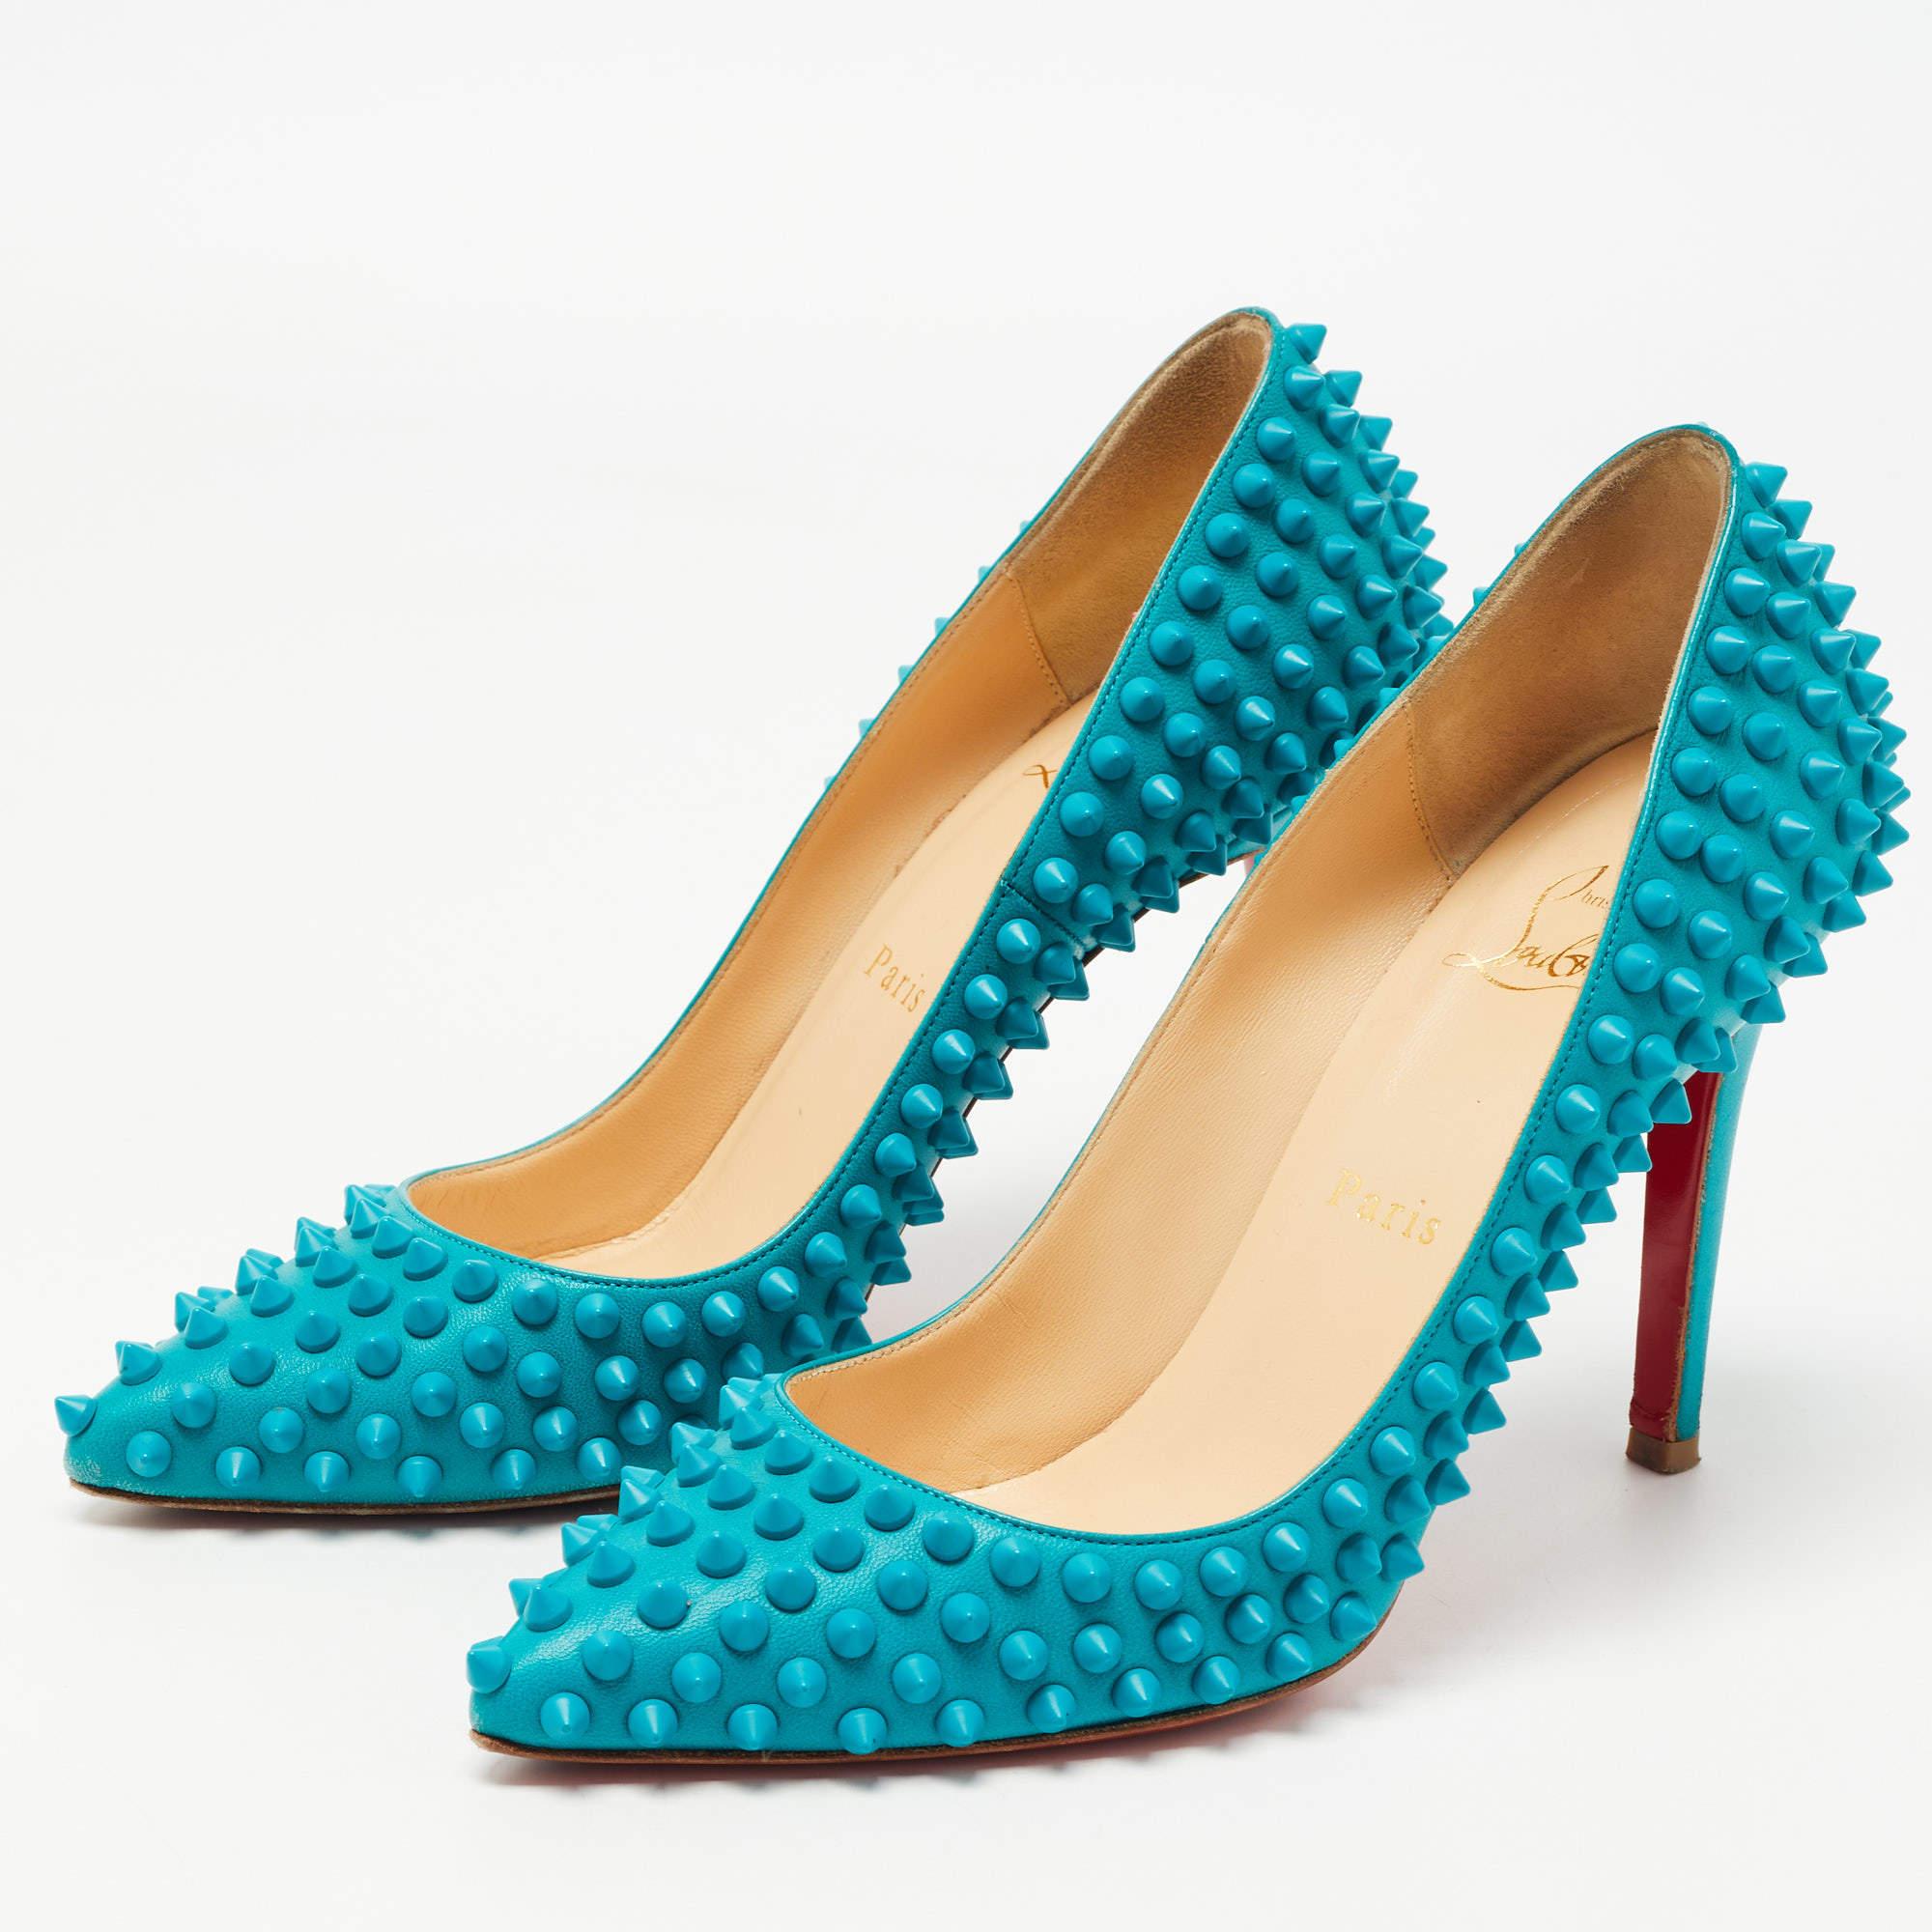 Women's Christian Louboutin Blue Leather Pigalle Spikes Pumps Size 37.5